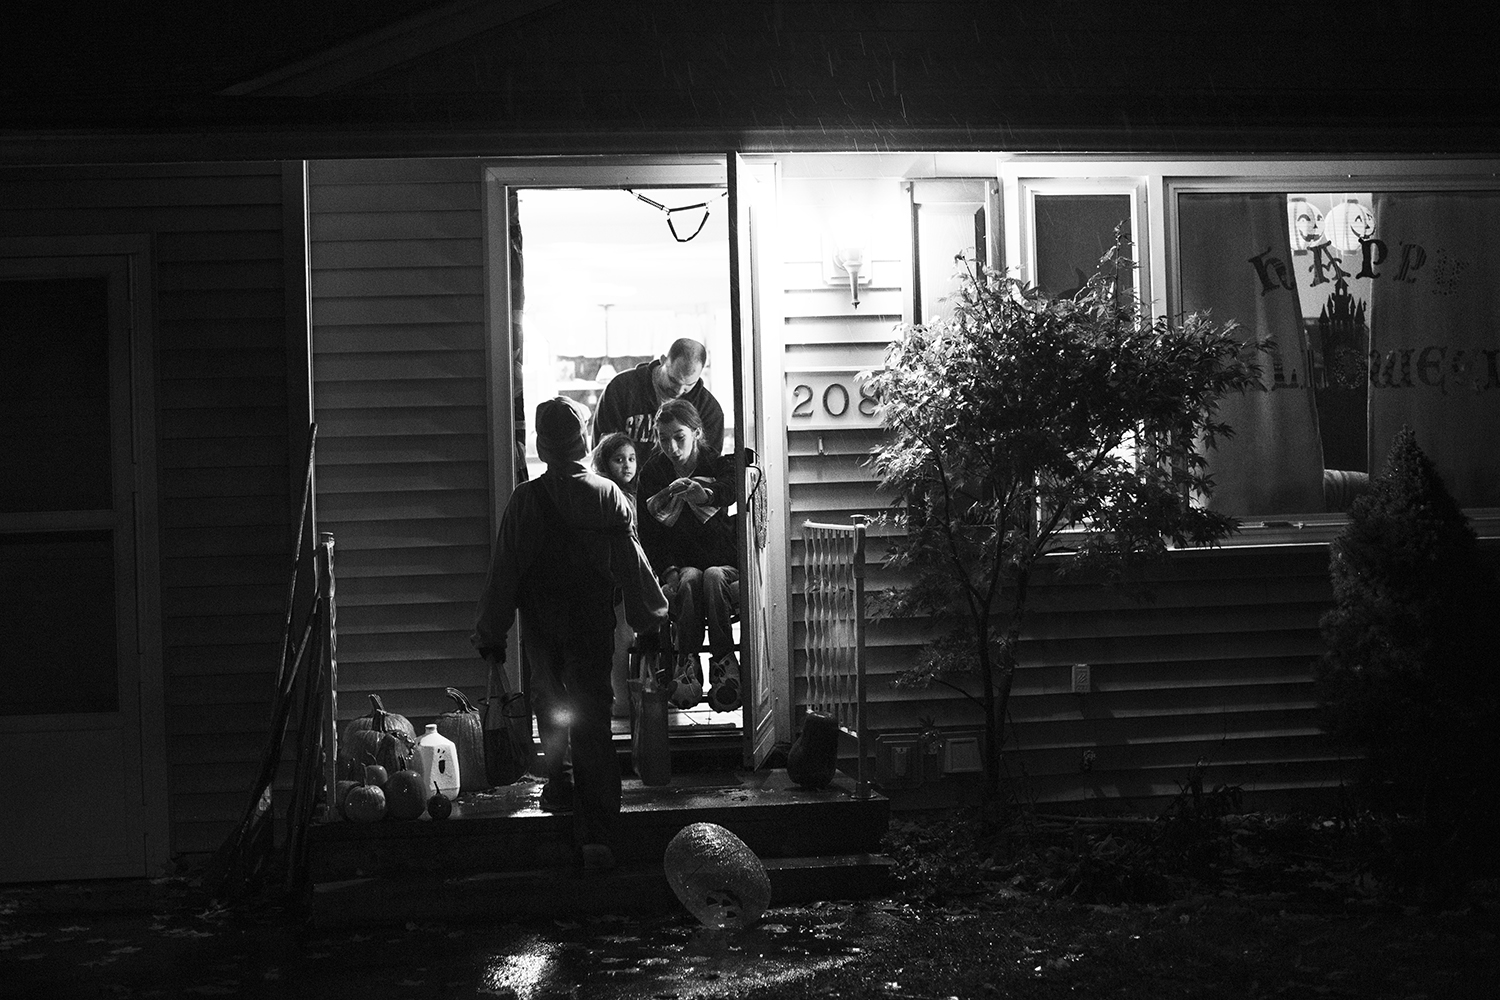 Gena hands out candy to trick-or-treaters on a rainy Halloween night while her siblings collect candy around the neighborhood.